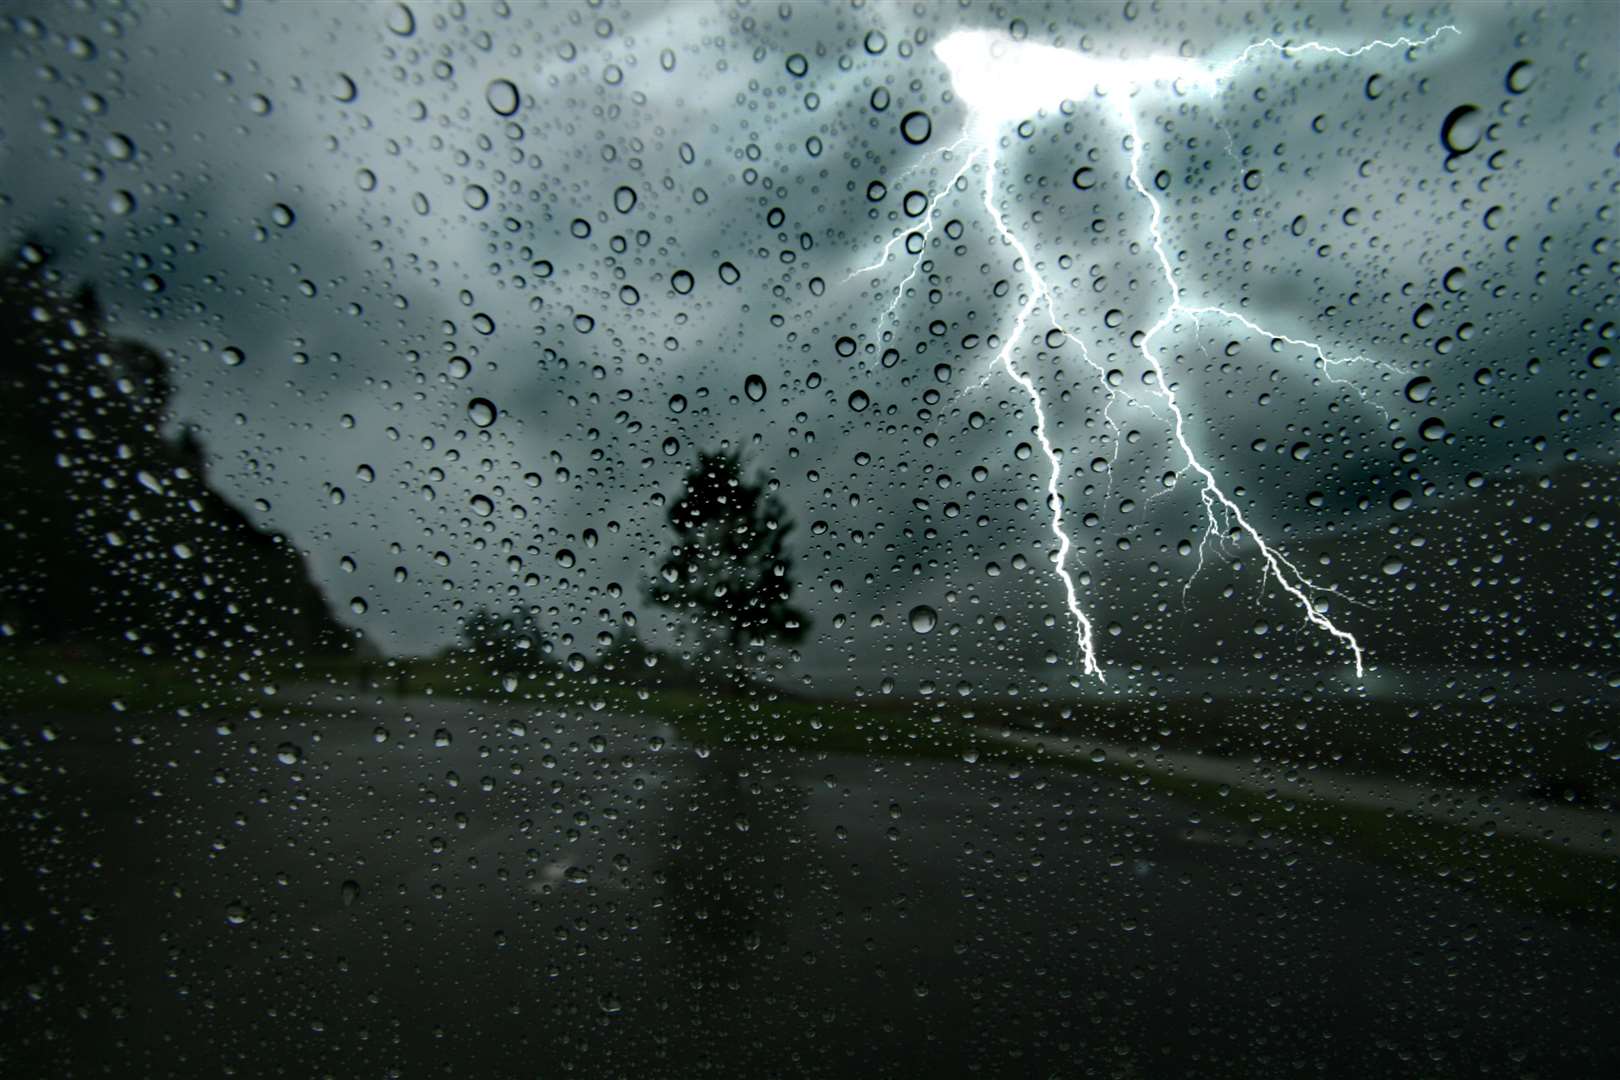 The Met Office has issued a warning for thunderstorms